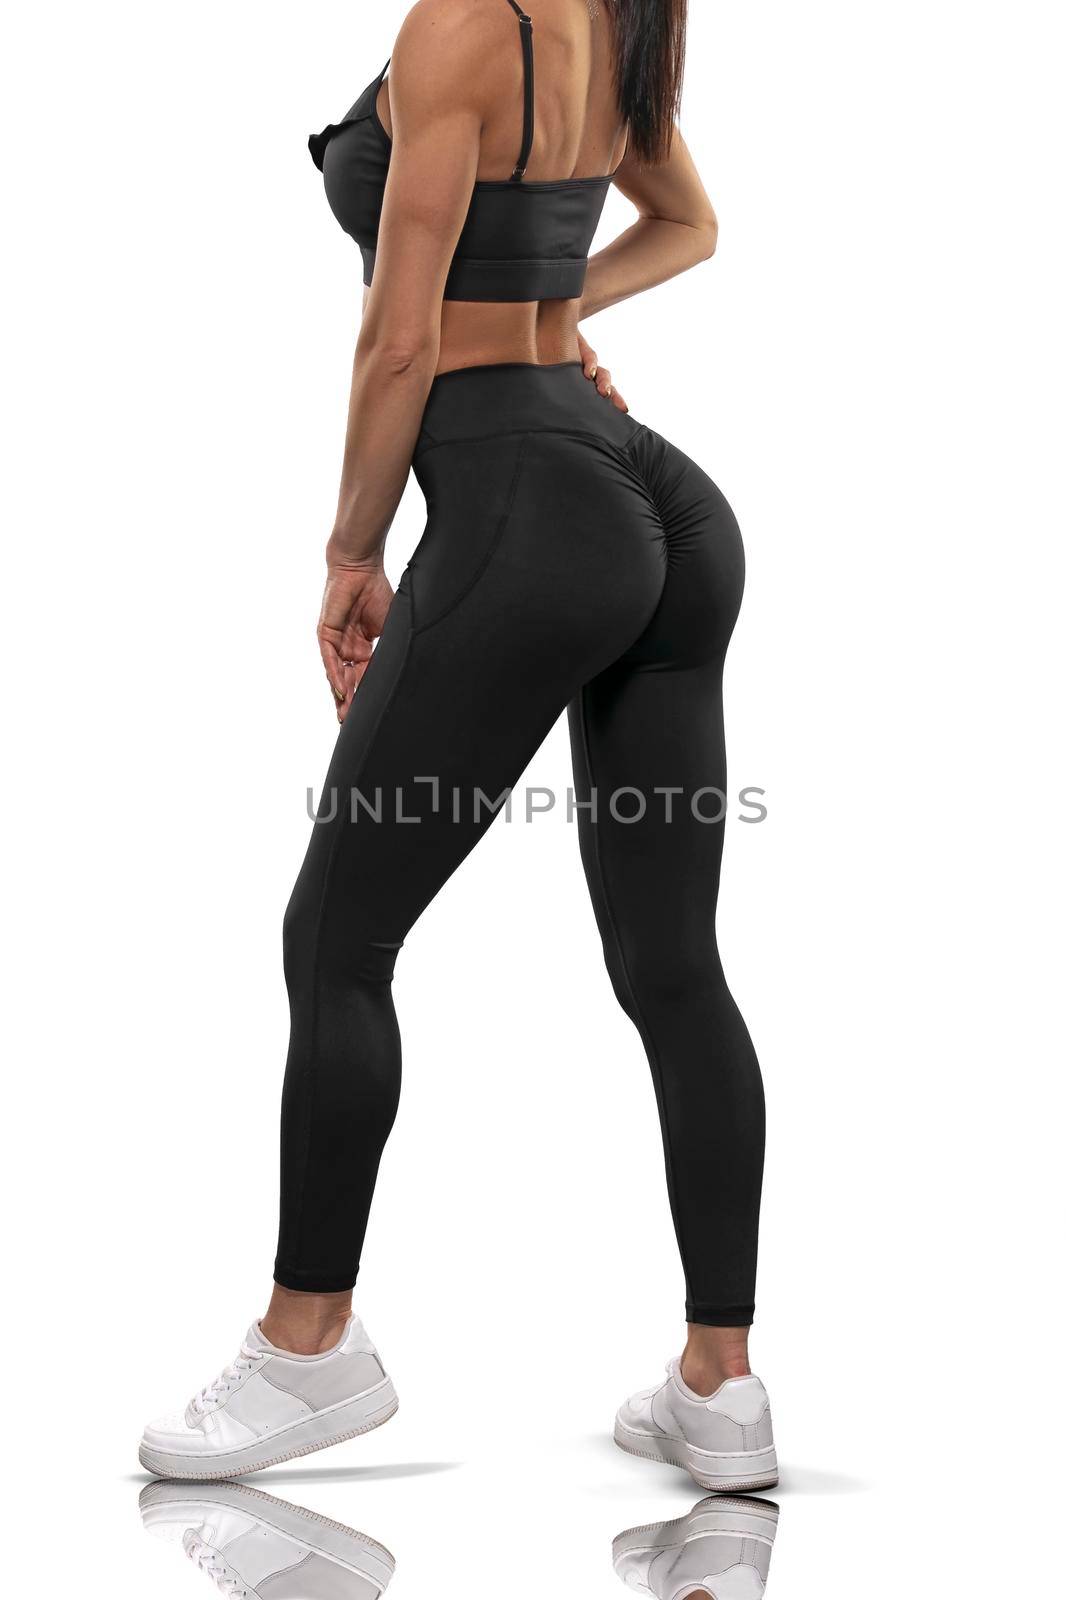 Legs girl in black leggings and a top stay back on a white background by but_photo